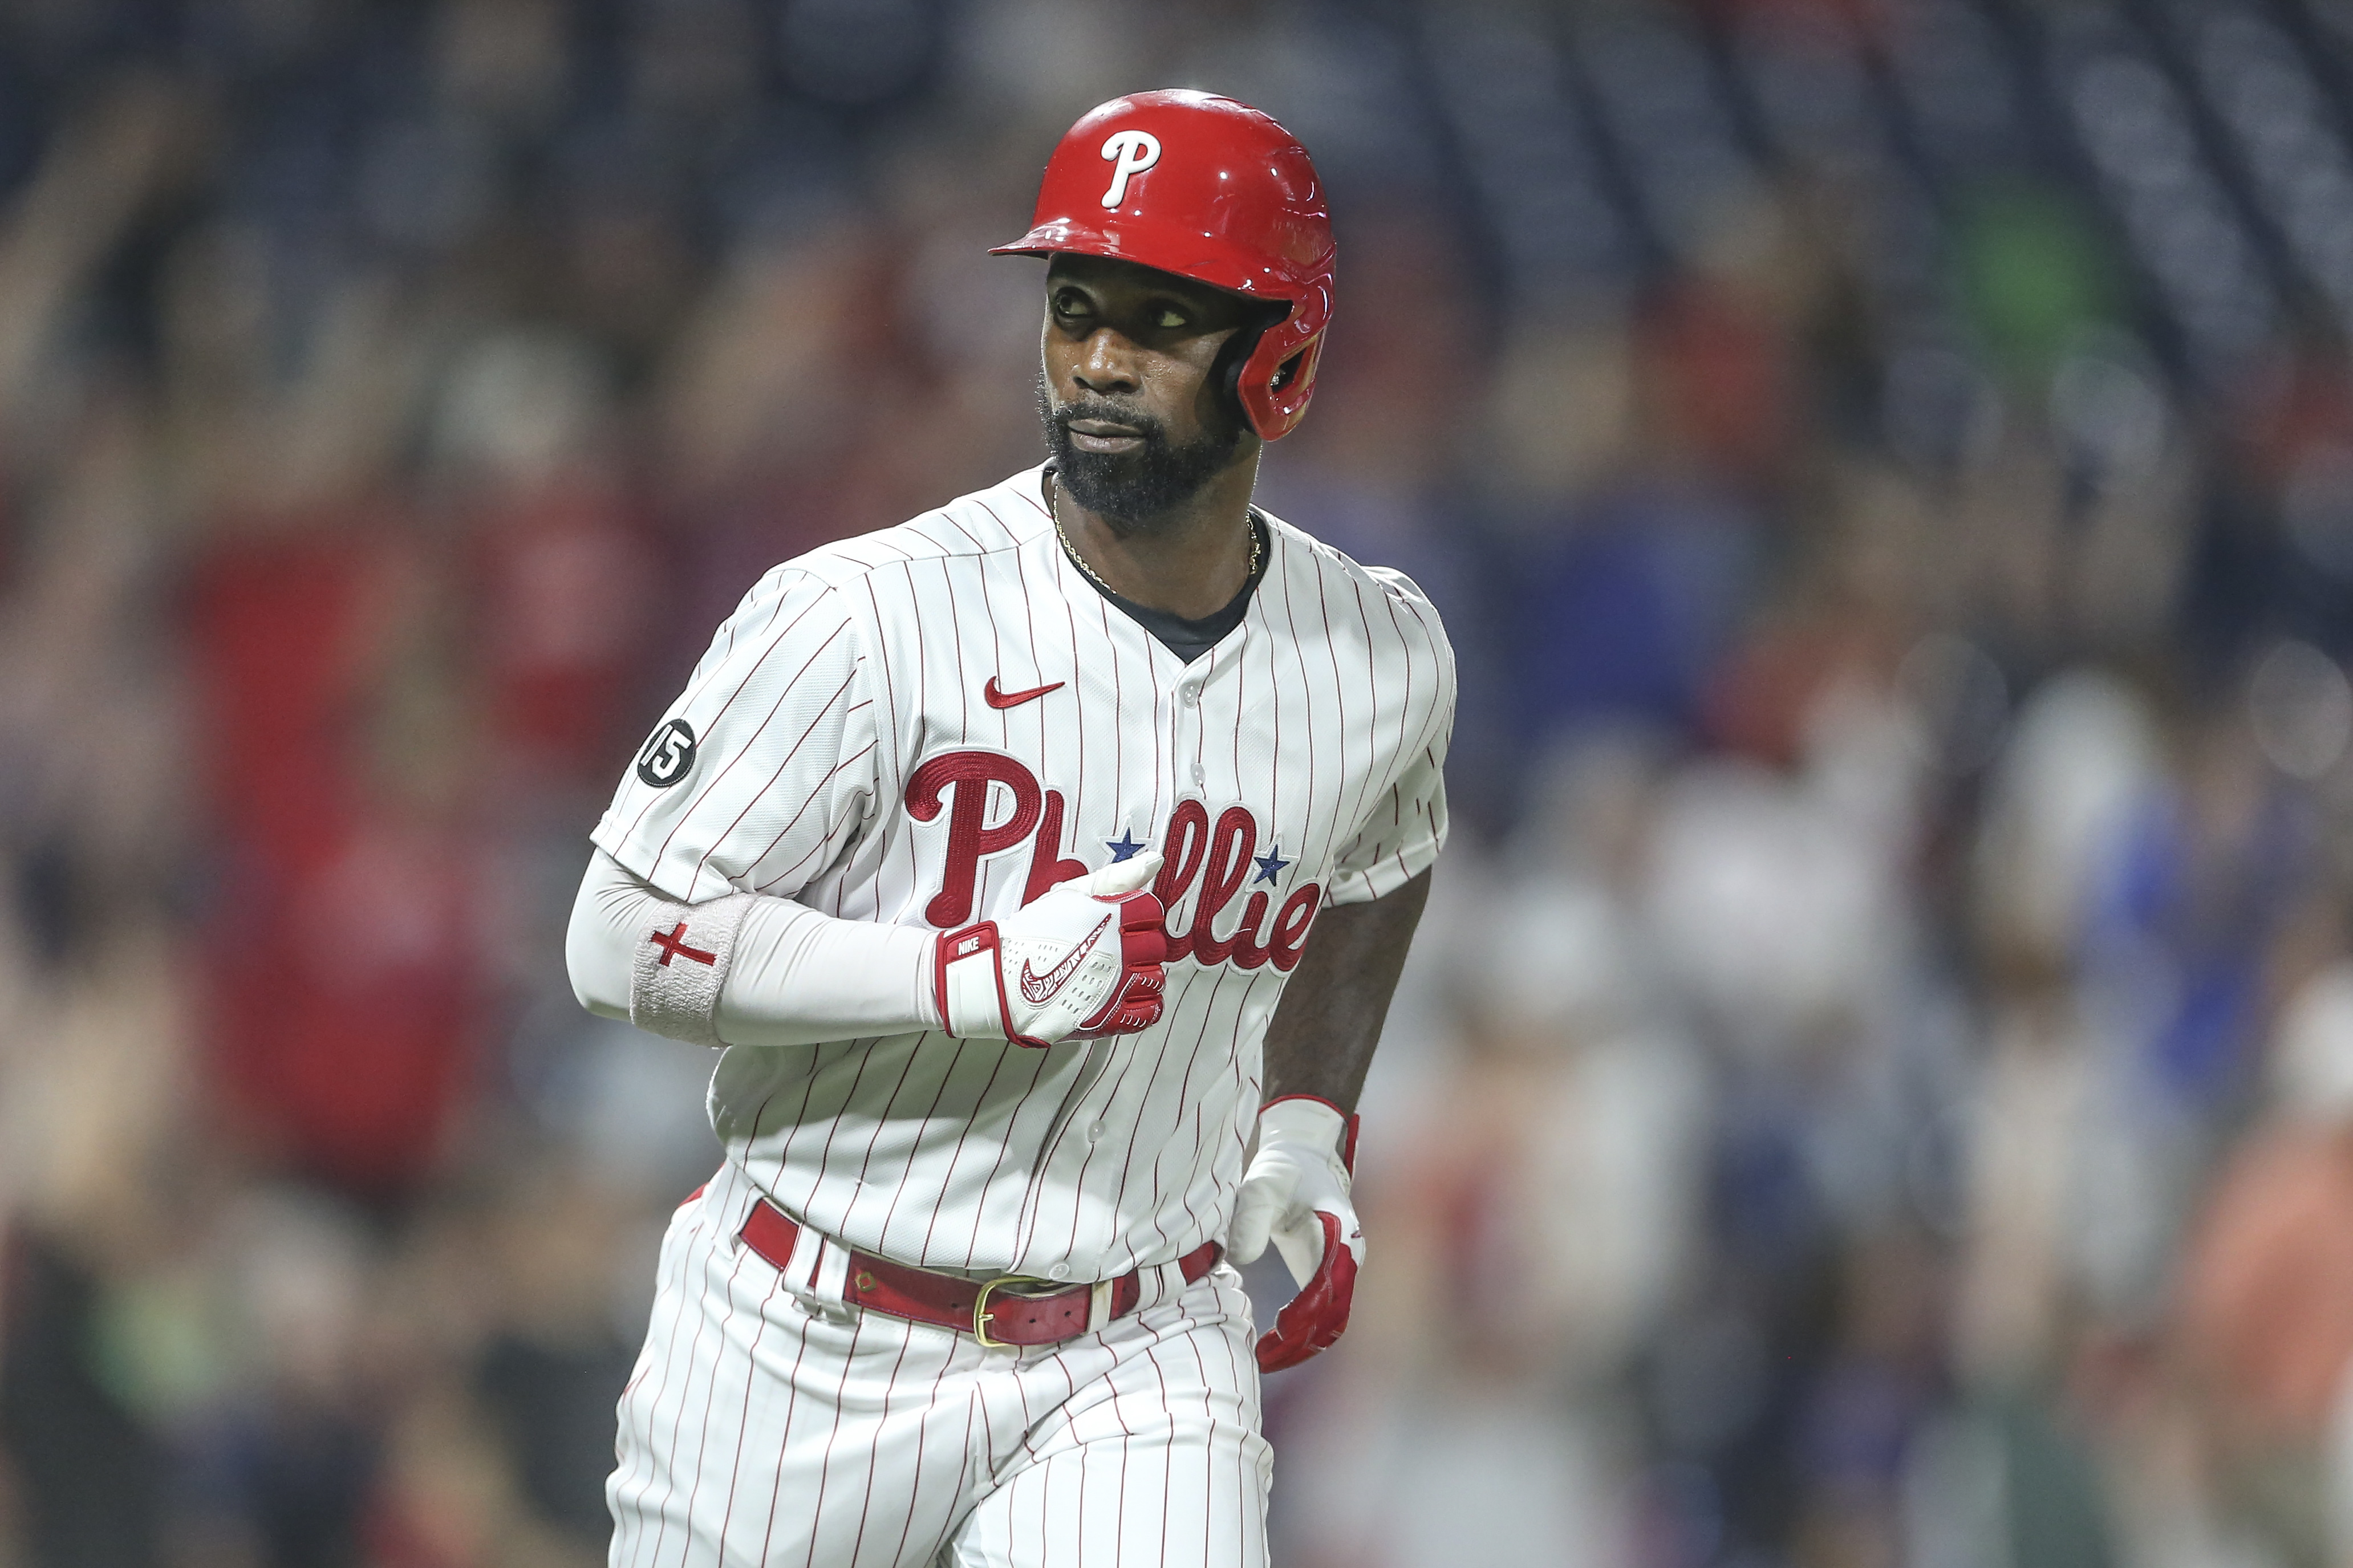 Phillies' Andrew McCutchen has torn ACL, will miss rest of season